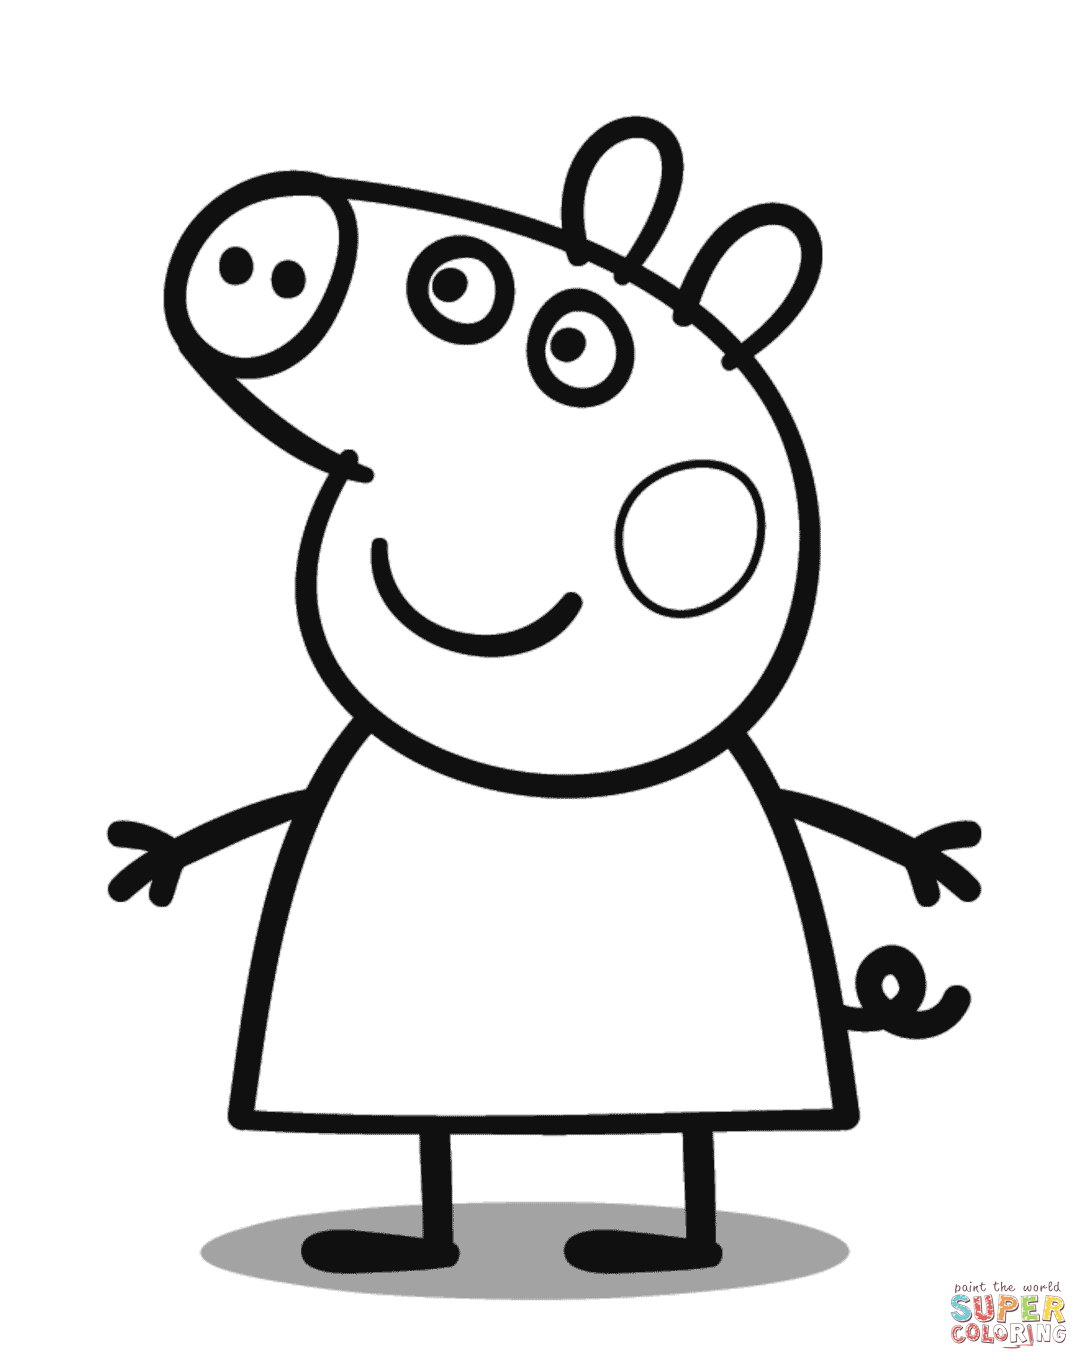 1545616463_peppa-pig-coloring-page